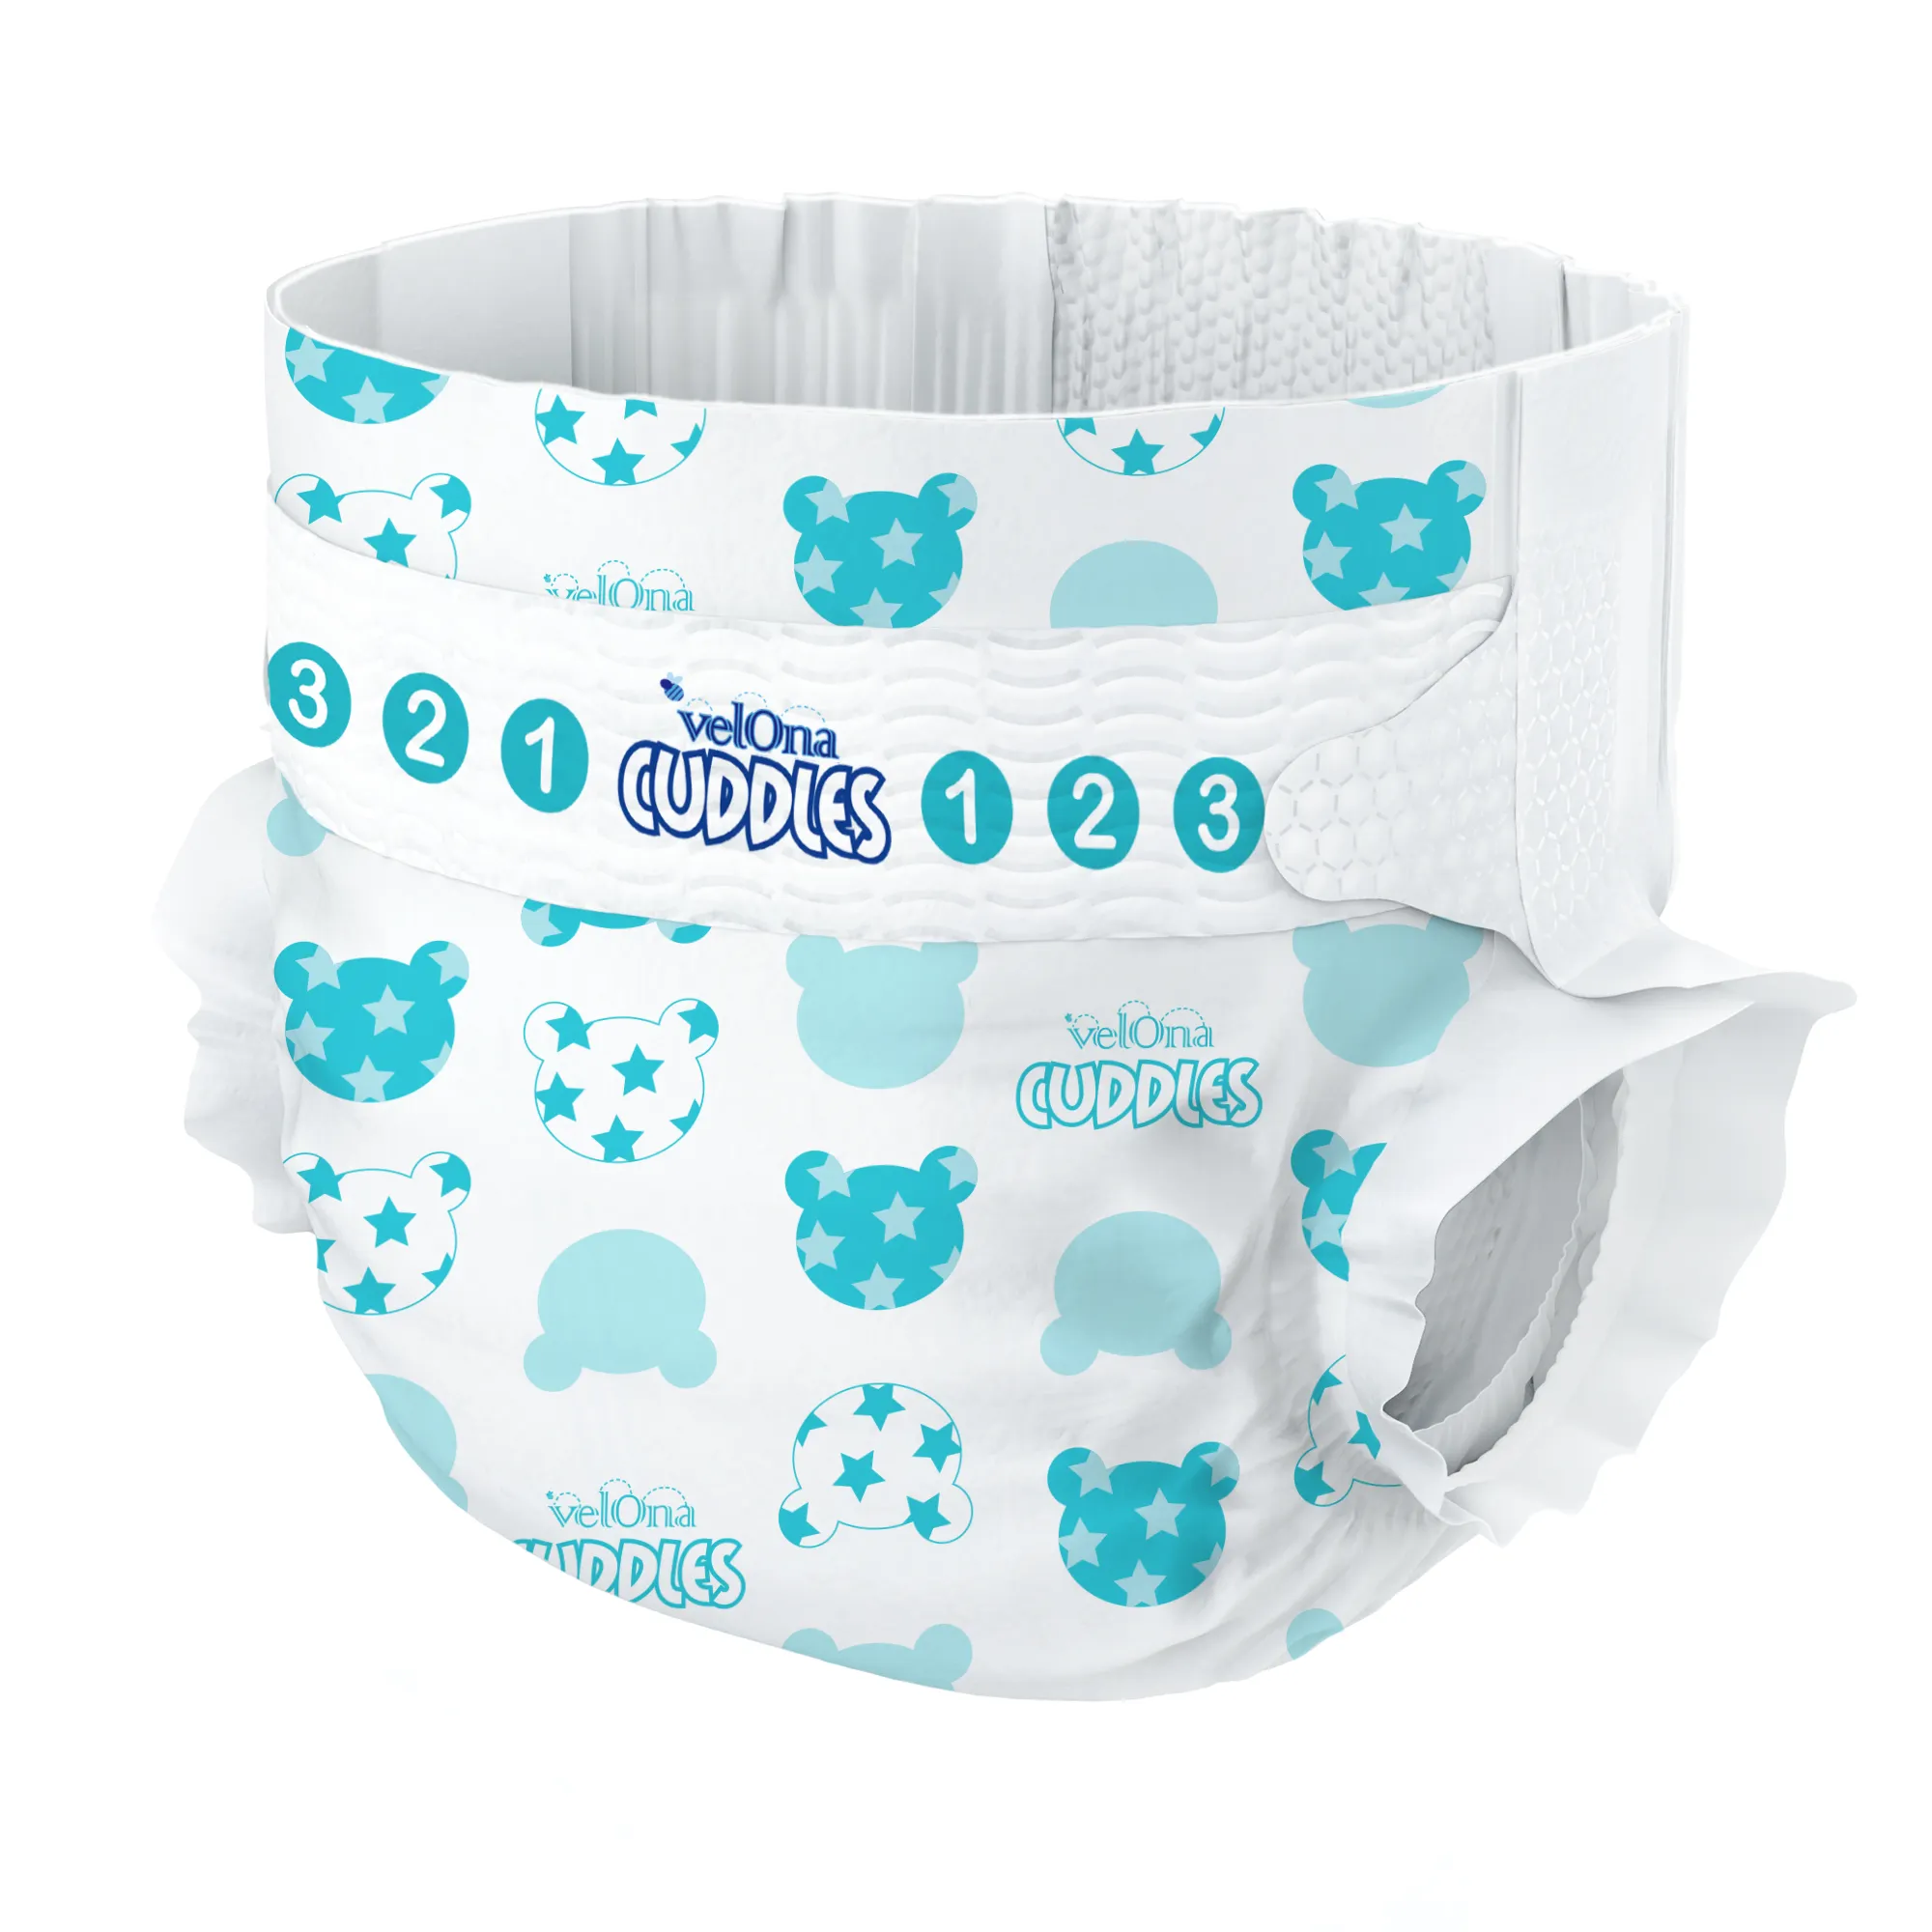 besuper high absorption baby joy Diaper/ nappies Baby disposable